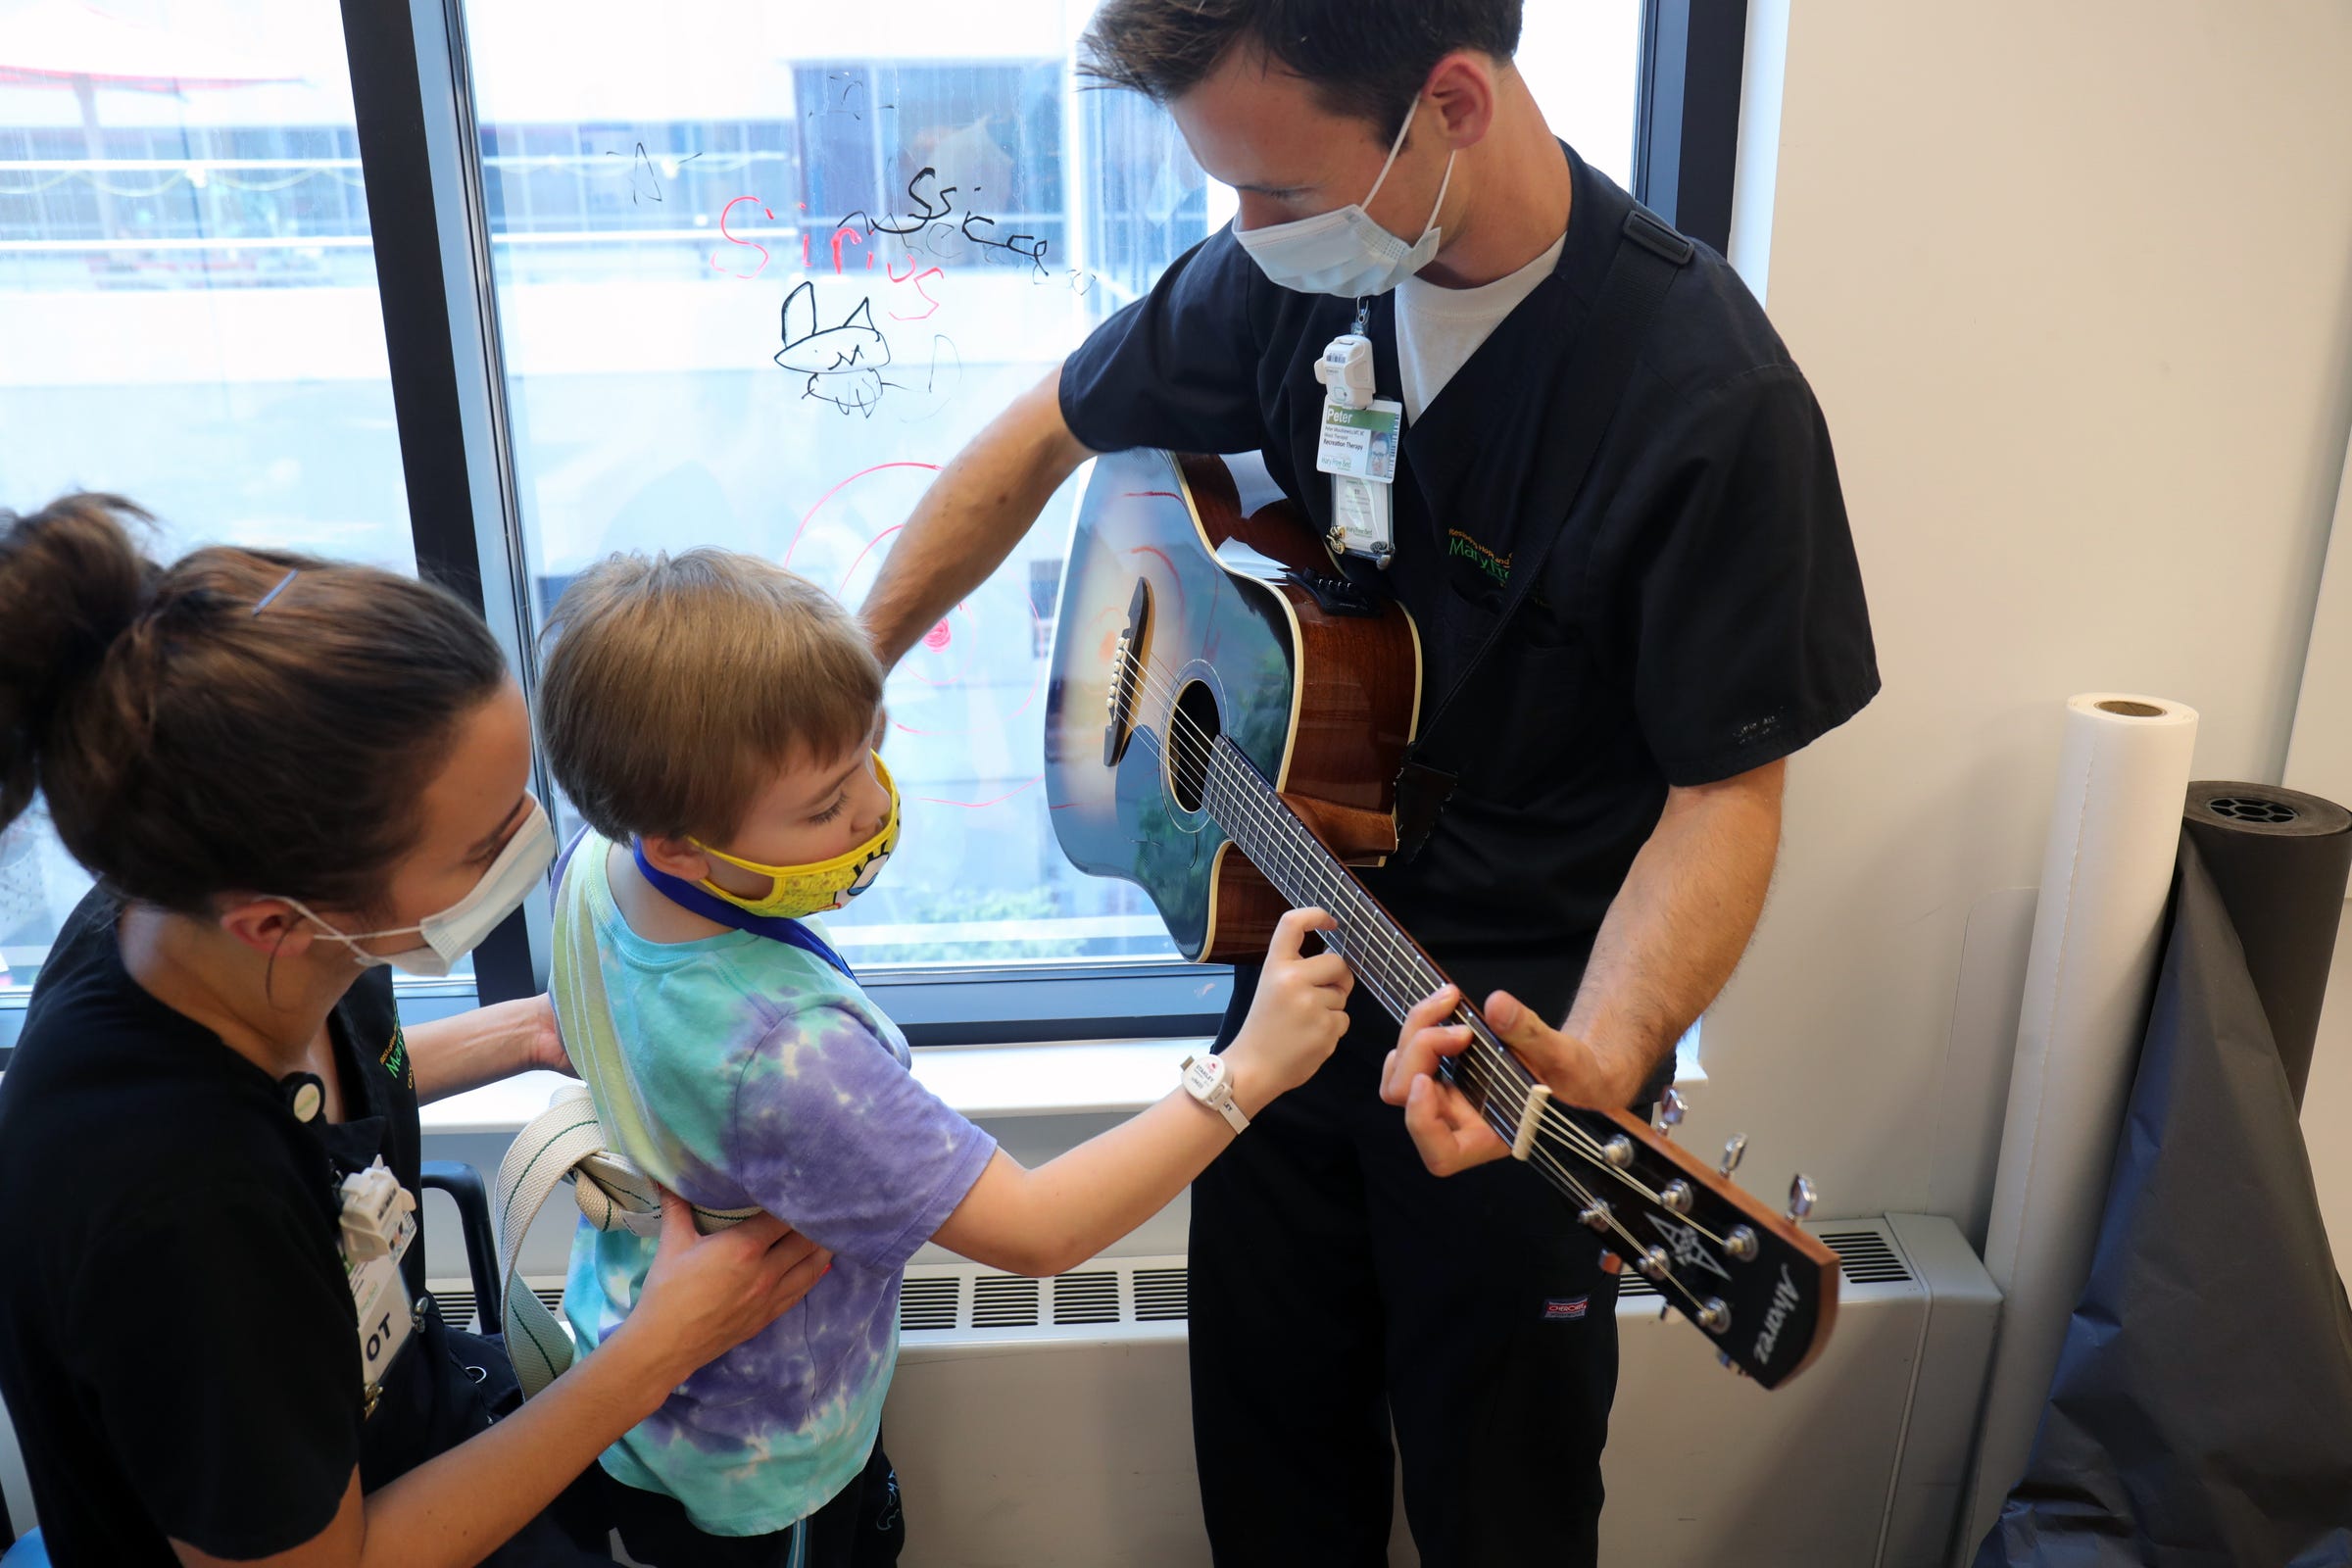 Waylon Weheir, 7, had COVID in the spring and developed life-threatening complications.  Waylon suffered multiple strokes and myocarditis. Jaime Miller-Anten from rehab services Waylon and music therapist Peter Muszkiewicz have a session that is met to improve coordination, vocal cords strength and memory. Waylon got to play on the guitar this helps him with using his hands at Mary Free Bed Rehabilitation Hospital in Grand Rapids Monday, August 2, 2021.